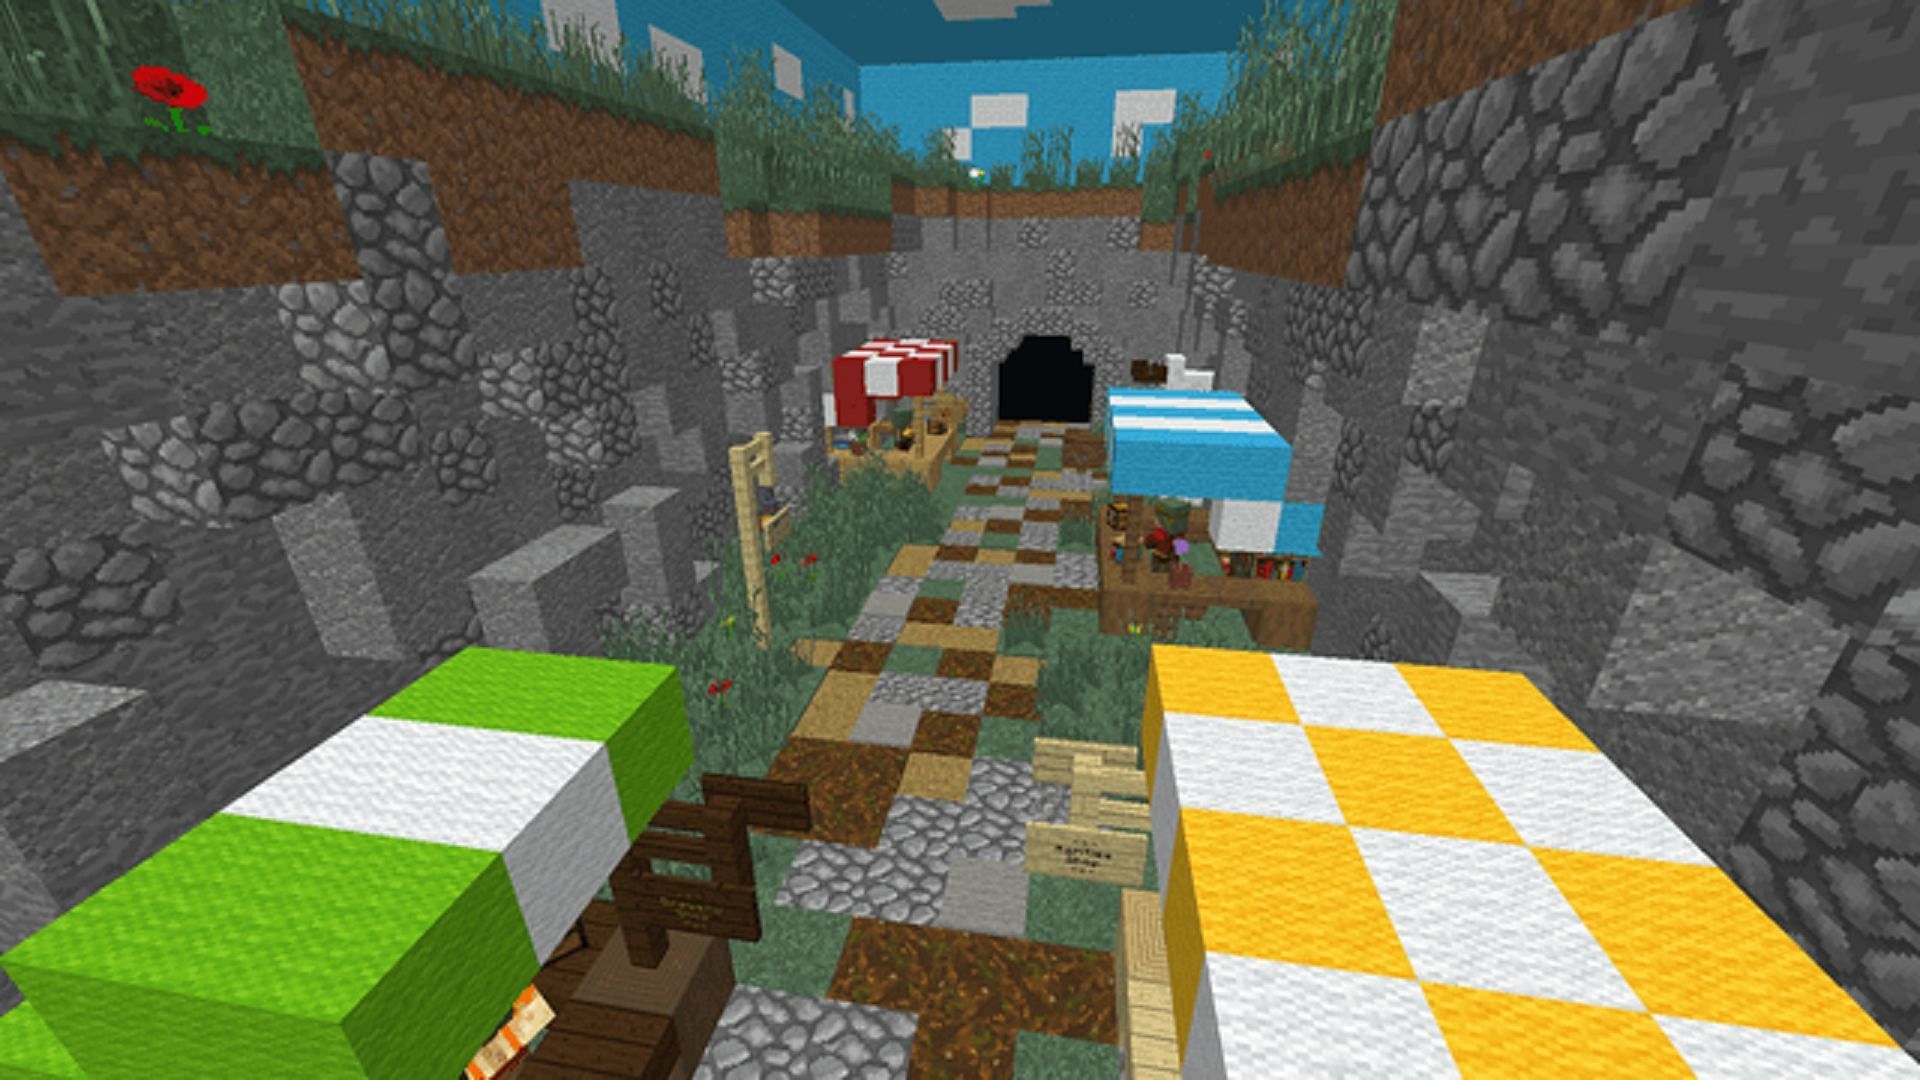 An underground marketplace for a server featuring custom traders (Image via u/nuttyfrutty/Reddit)